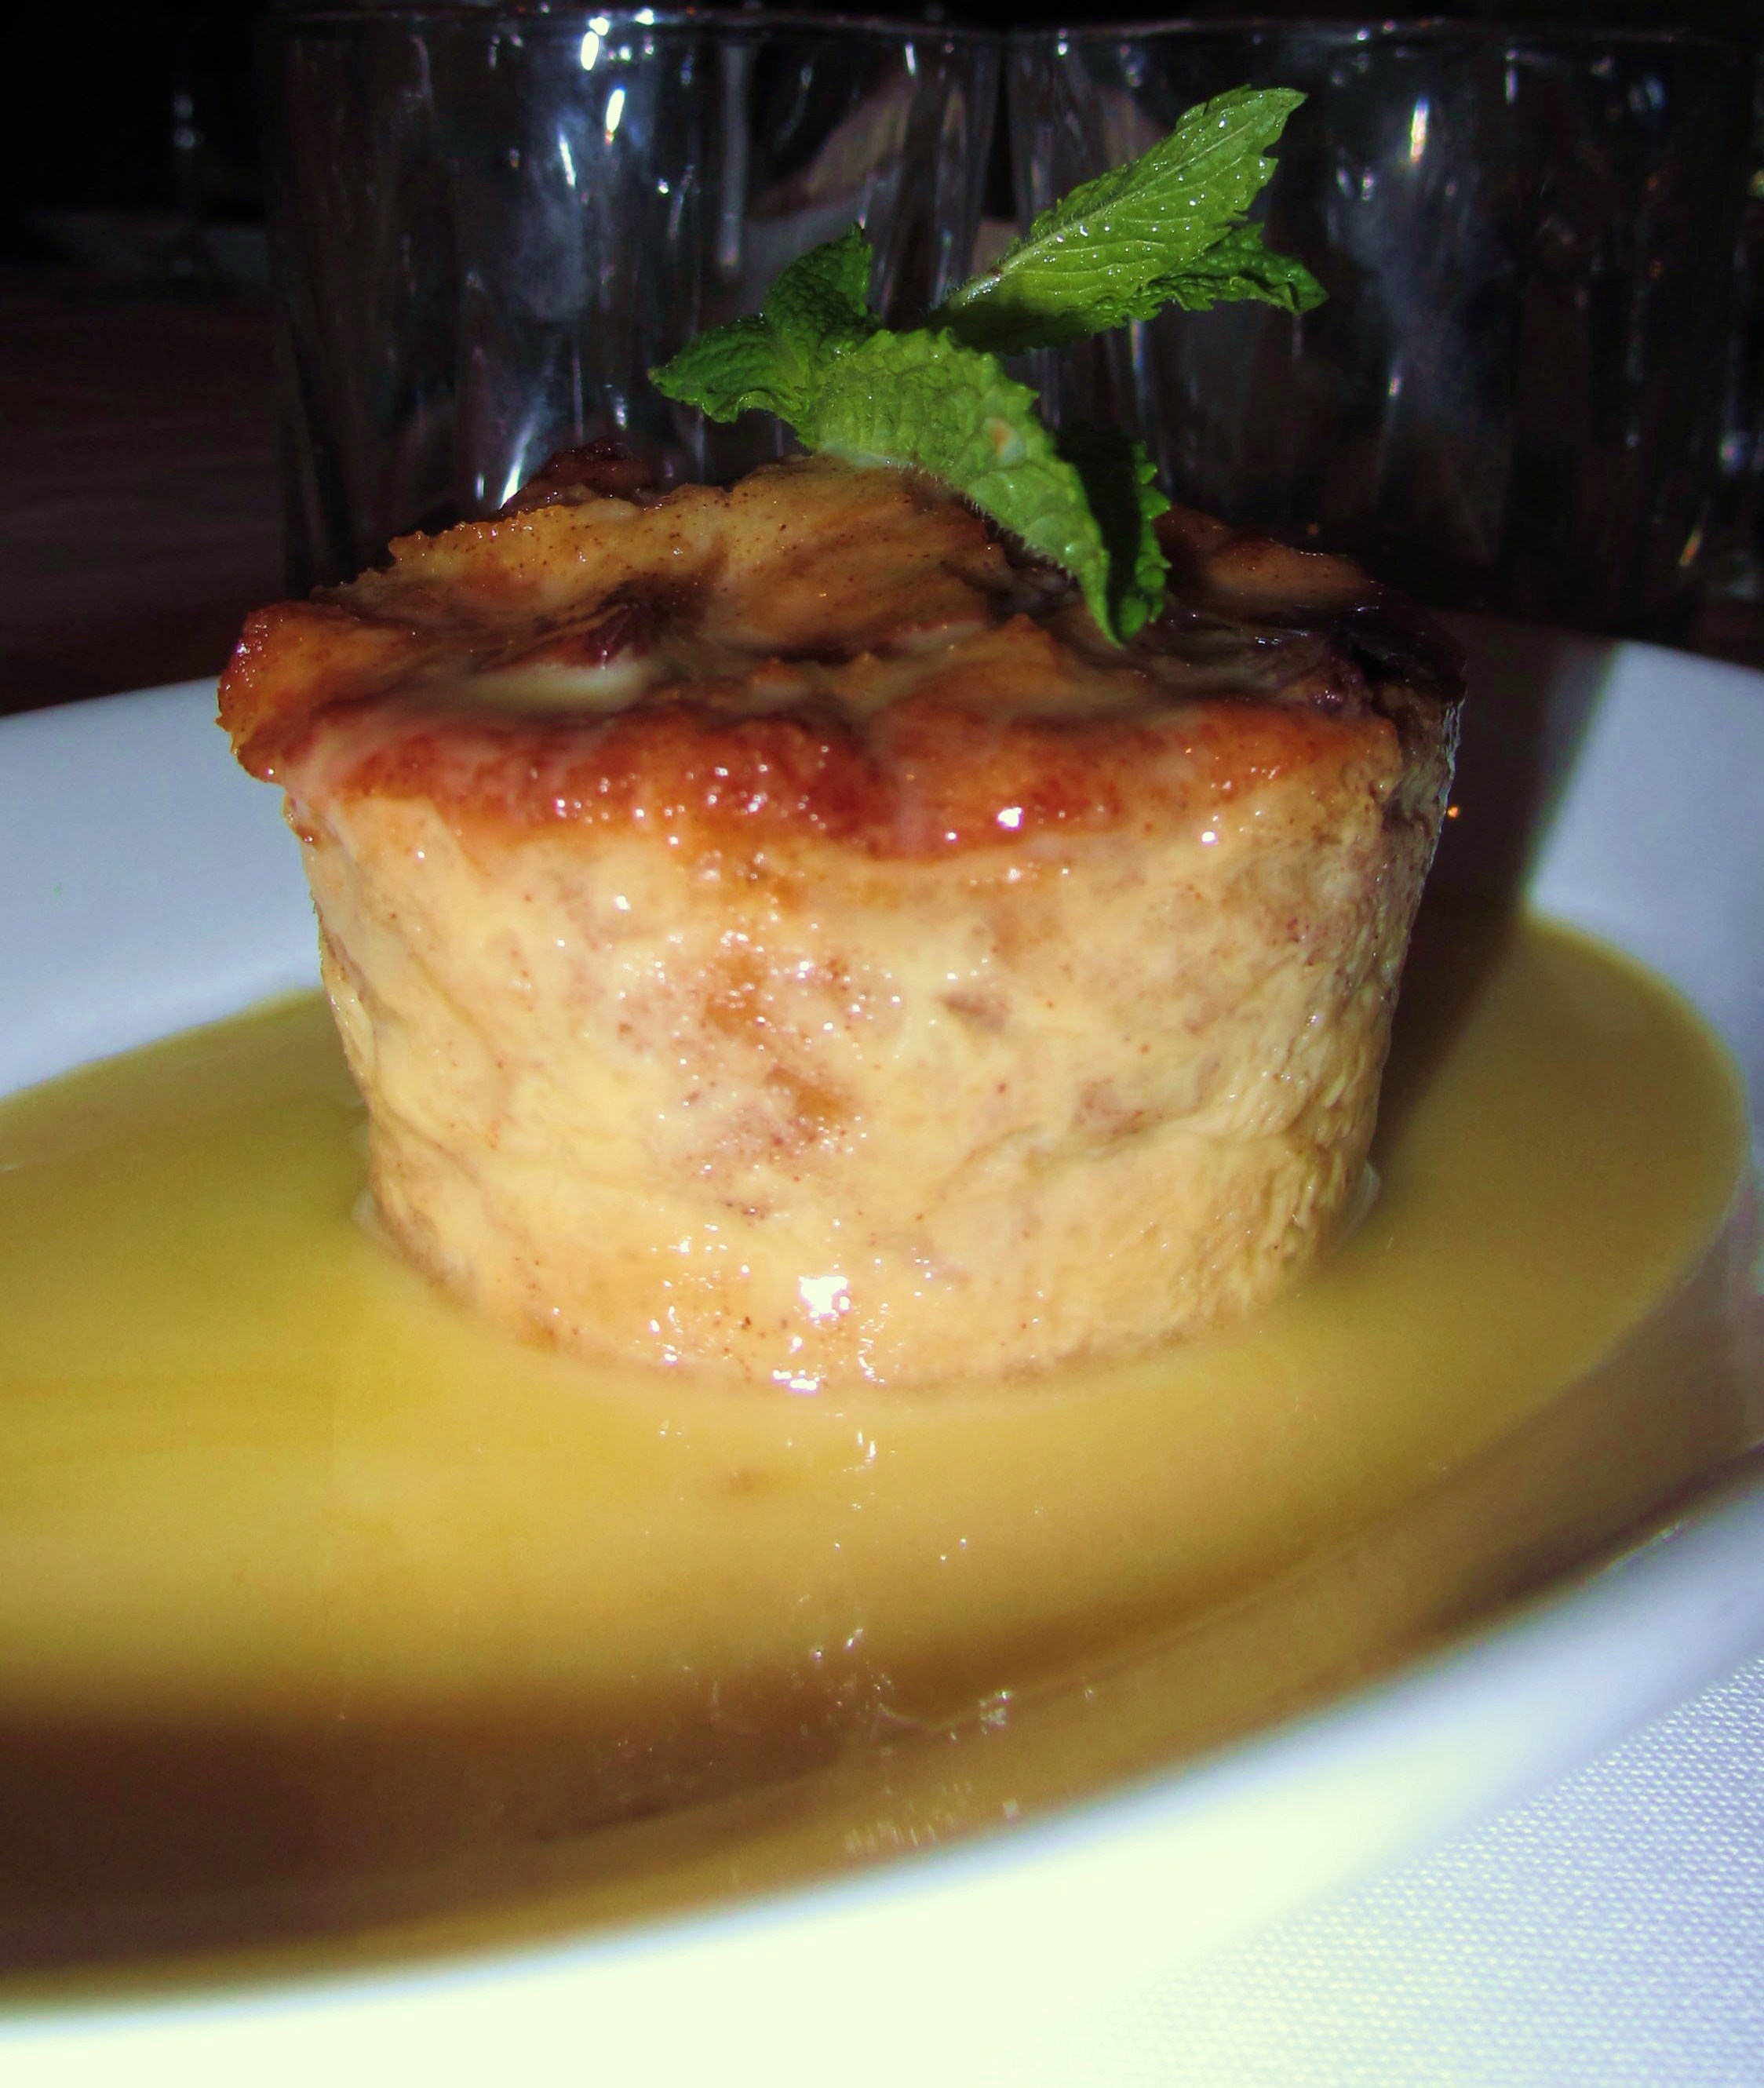 Breat pudding by Ruth's Chris